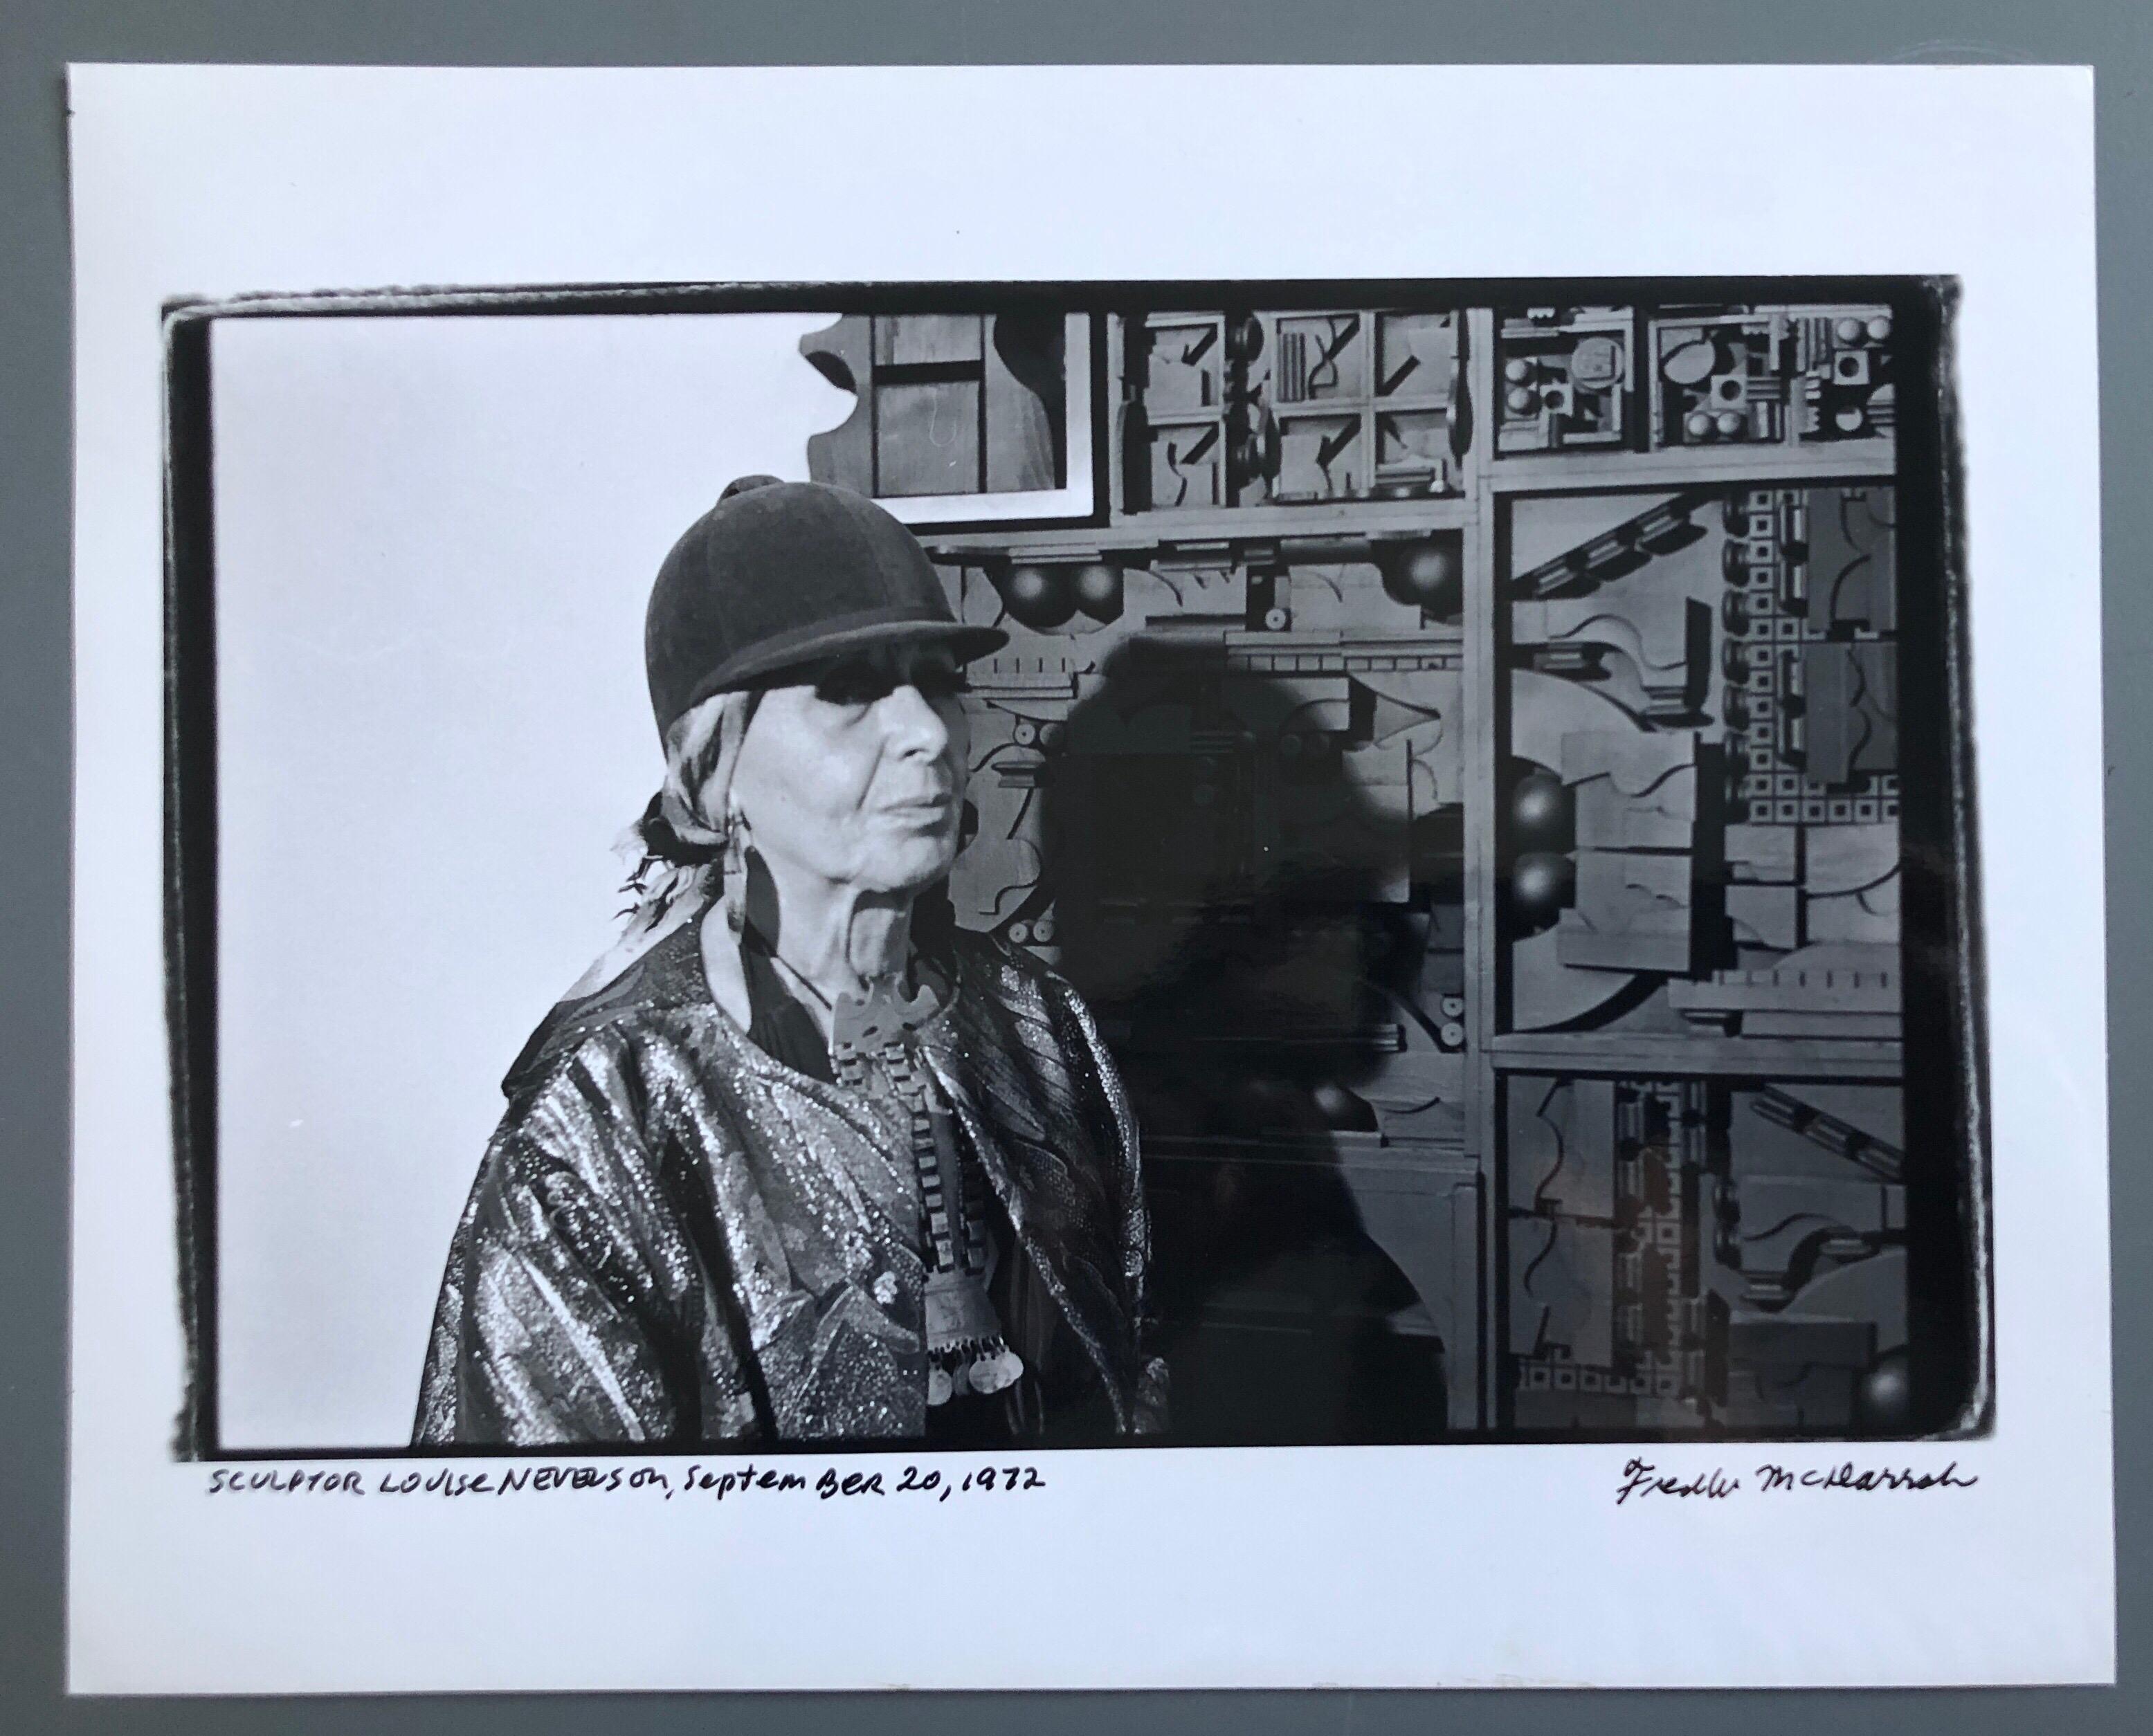 signed in ink and with photographer stamp verso and hand written title.

Louise Nevelson (September 23, 1899 – April 17, 1988) was an American sculptor known for her monumental, monochromatic, wooden wall pieces and outdoor sculptures.
Born Leah